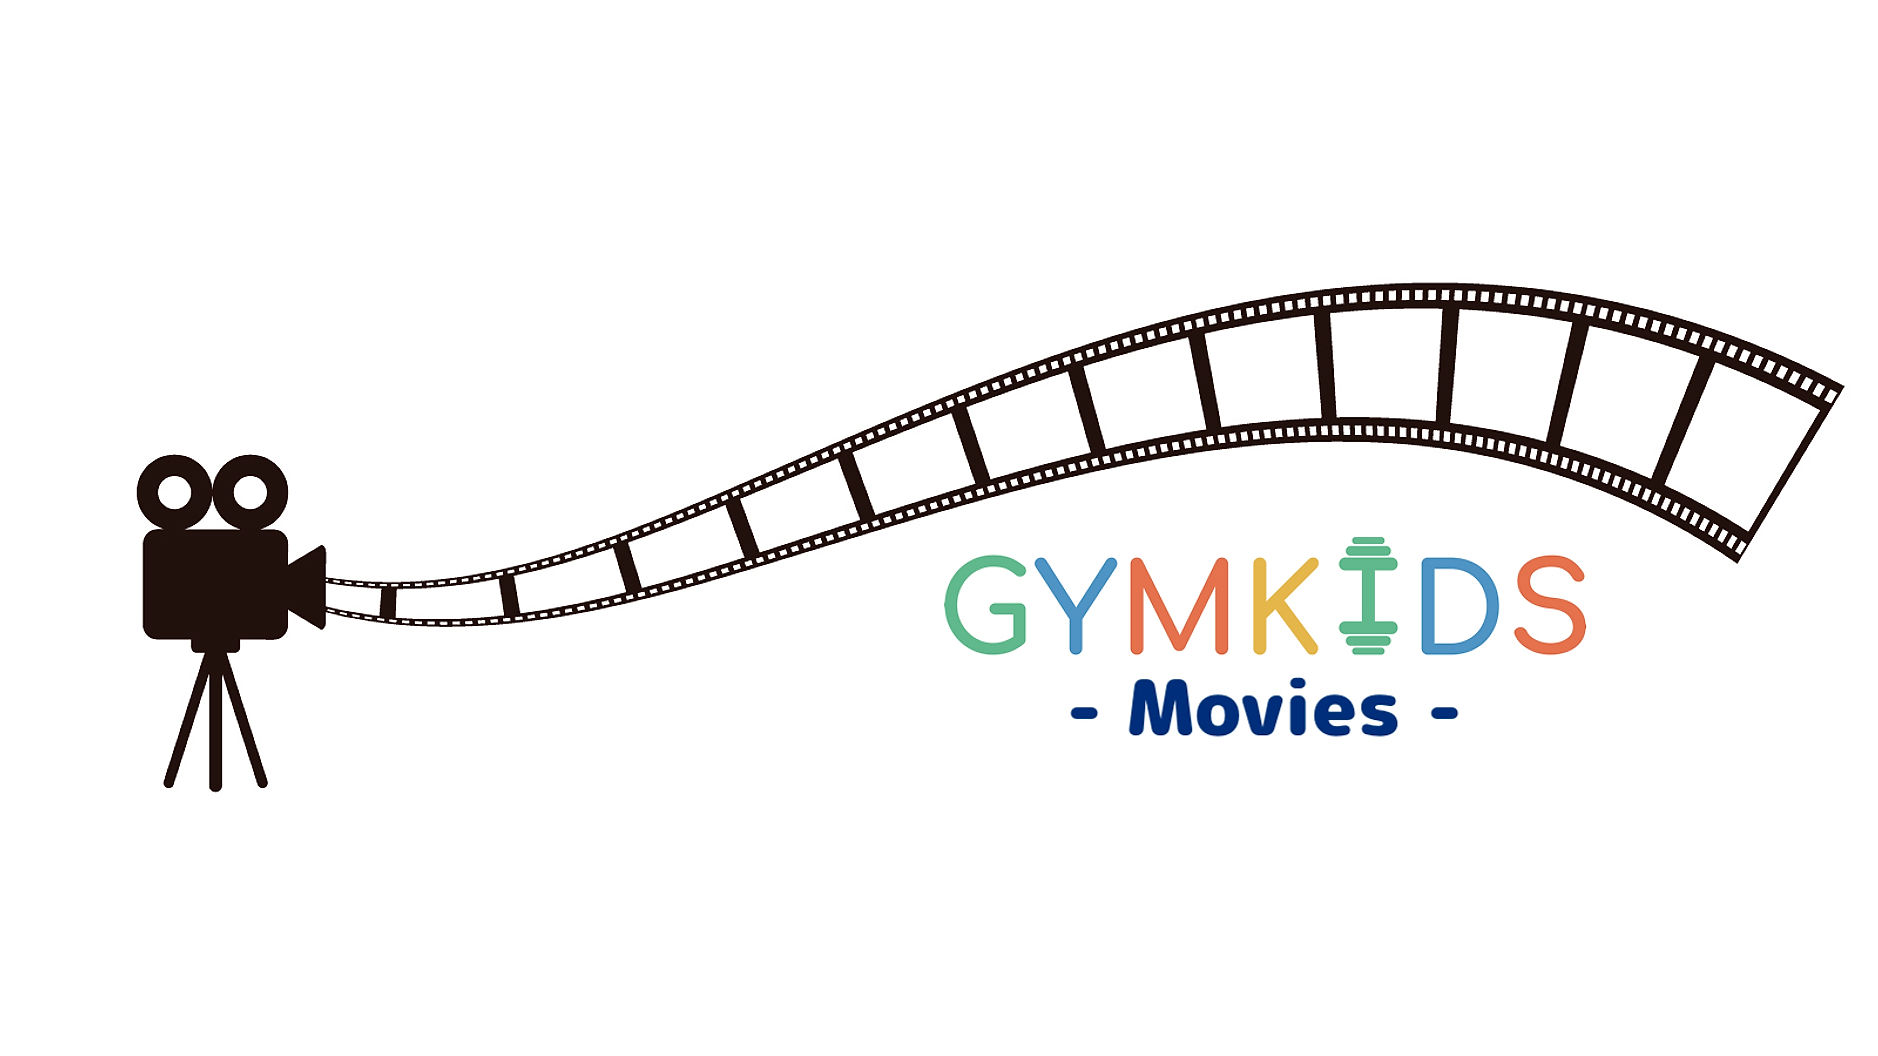 2020 GYMKIDS Movies